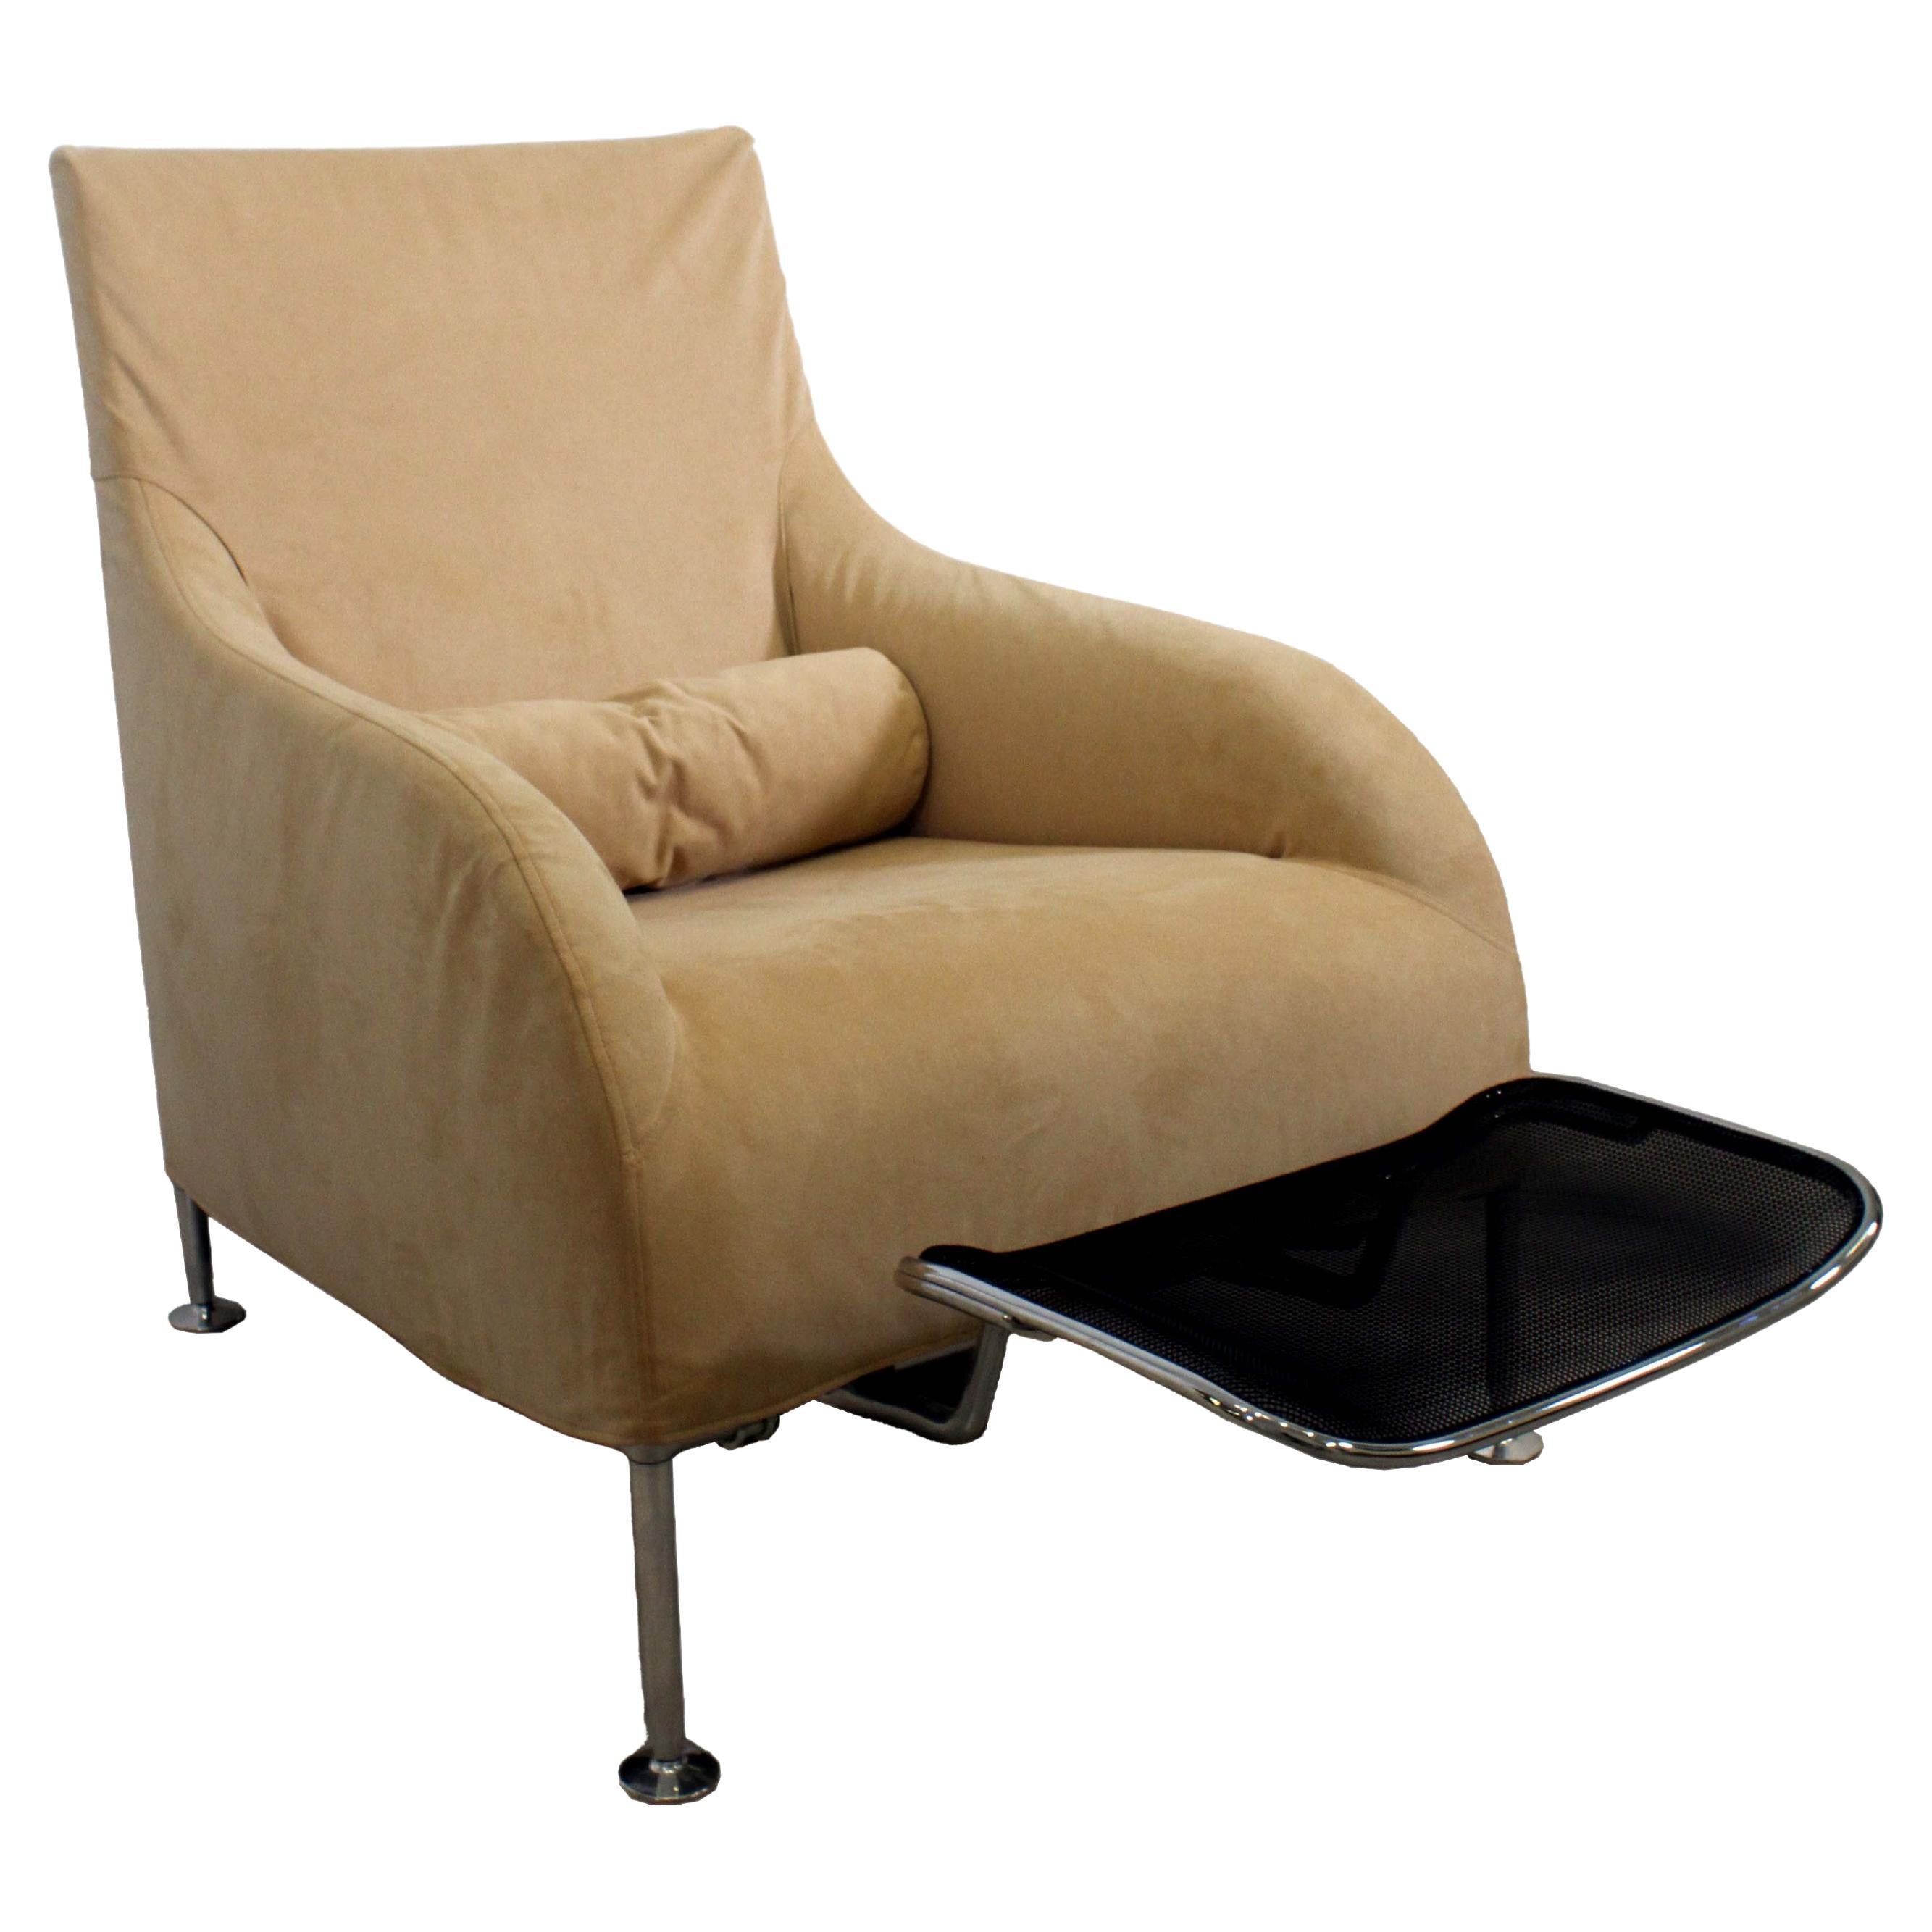 B&B Italia Maxalto Florence by Antonio Citterio Lounge Chair with Mesh Foot Rest For Sale